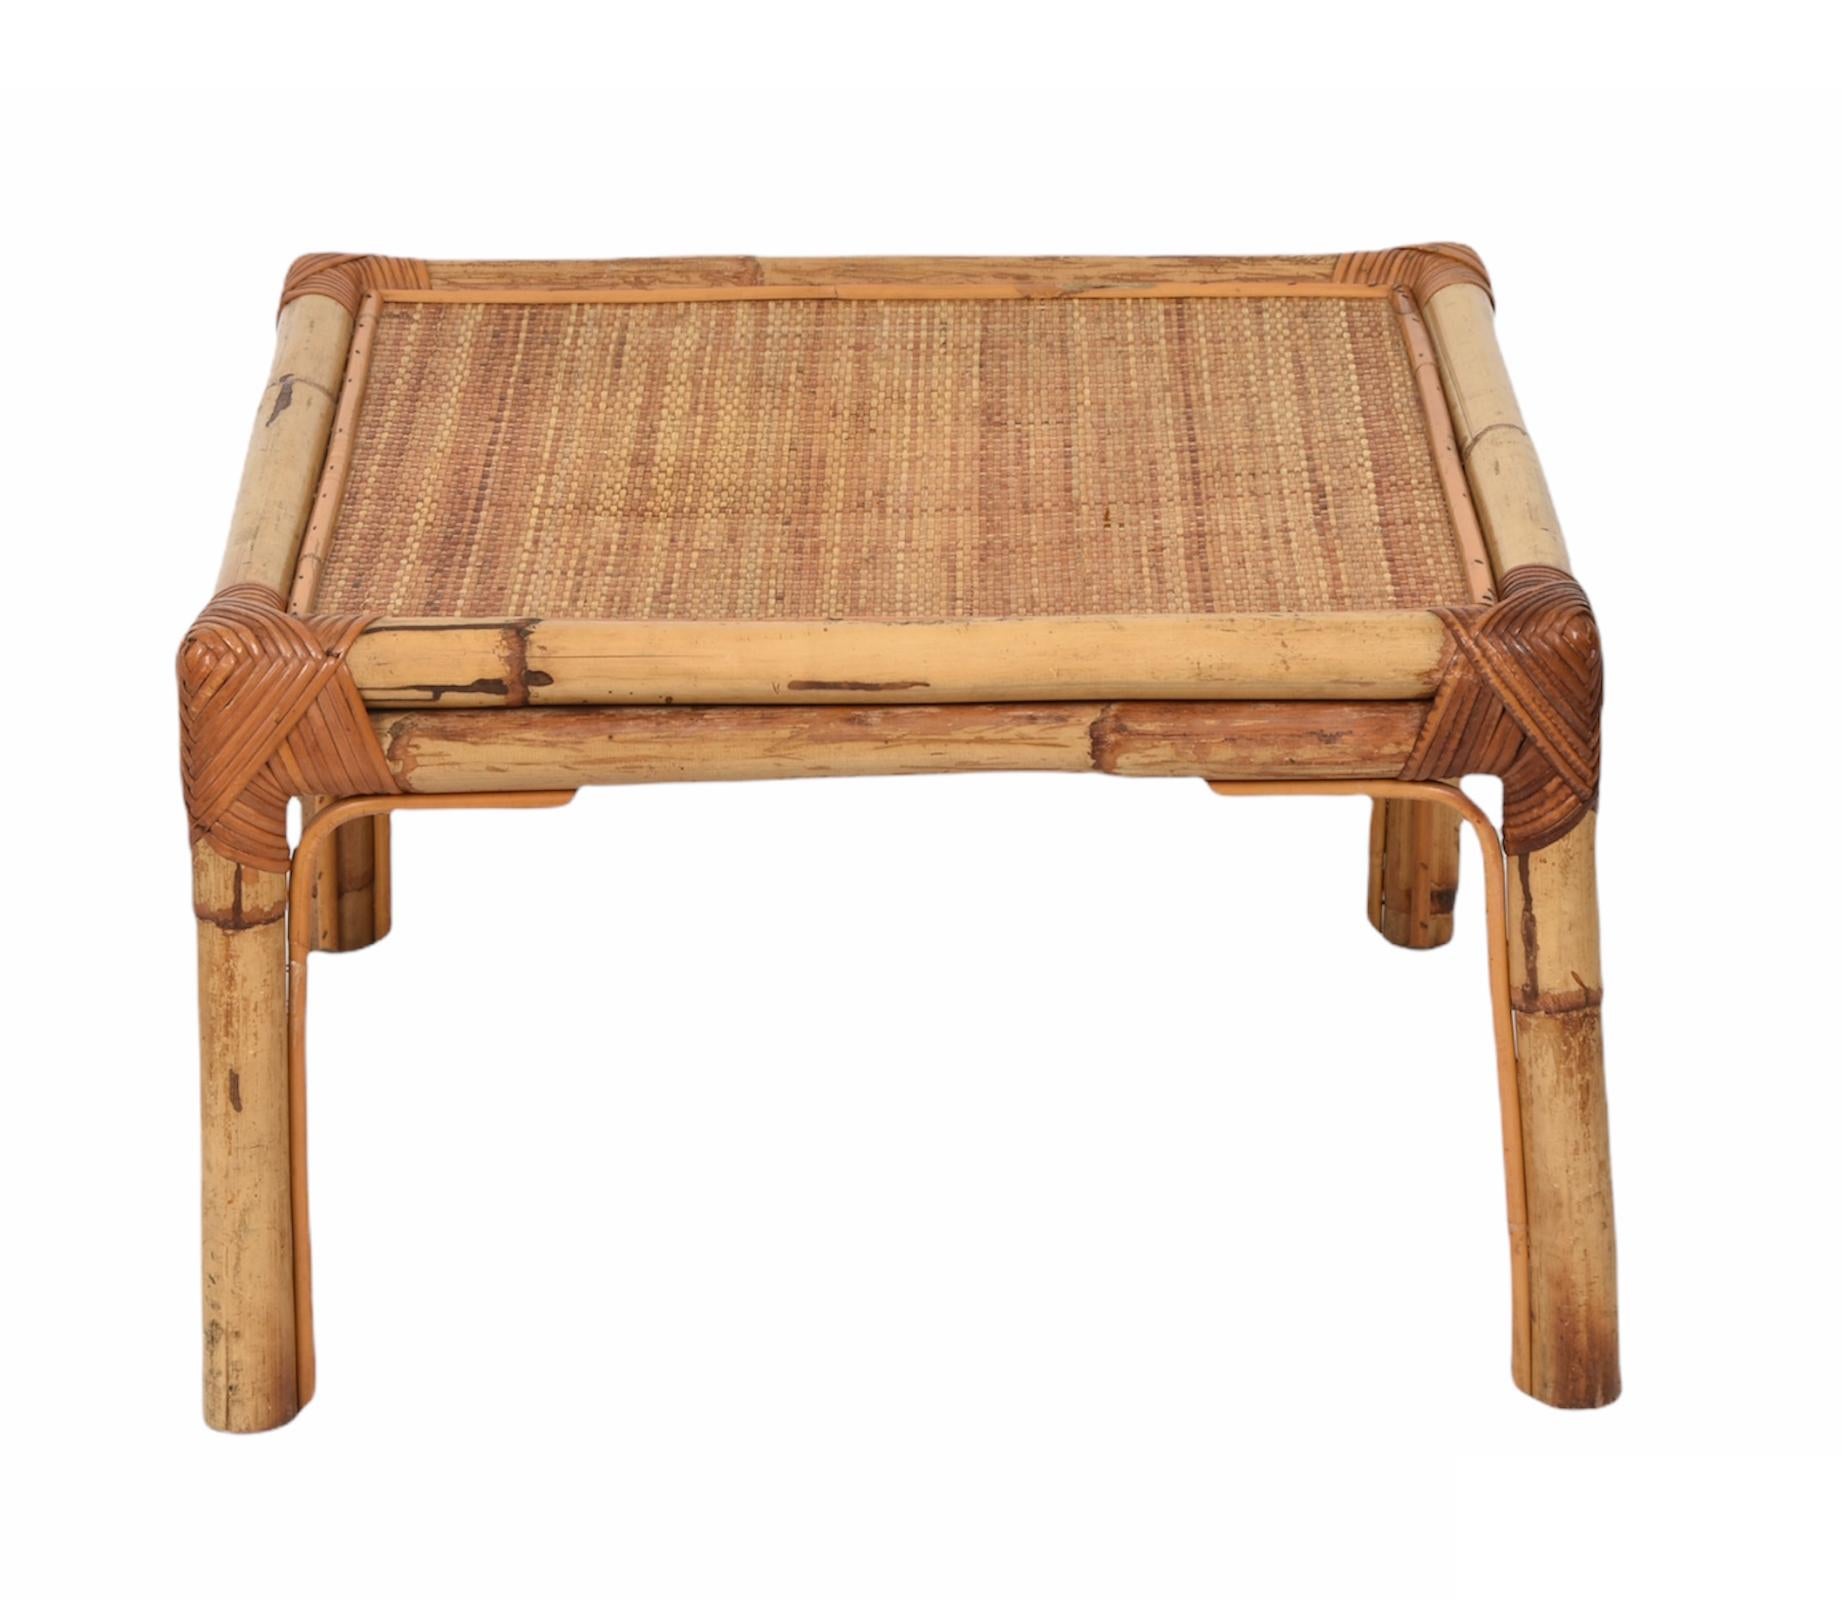 Vivai del Sud Midcentury Italian Squared Bamboo and Rattan Coffee Table, 1970 For Sale 10